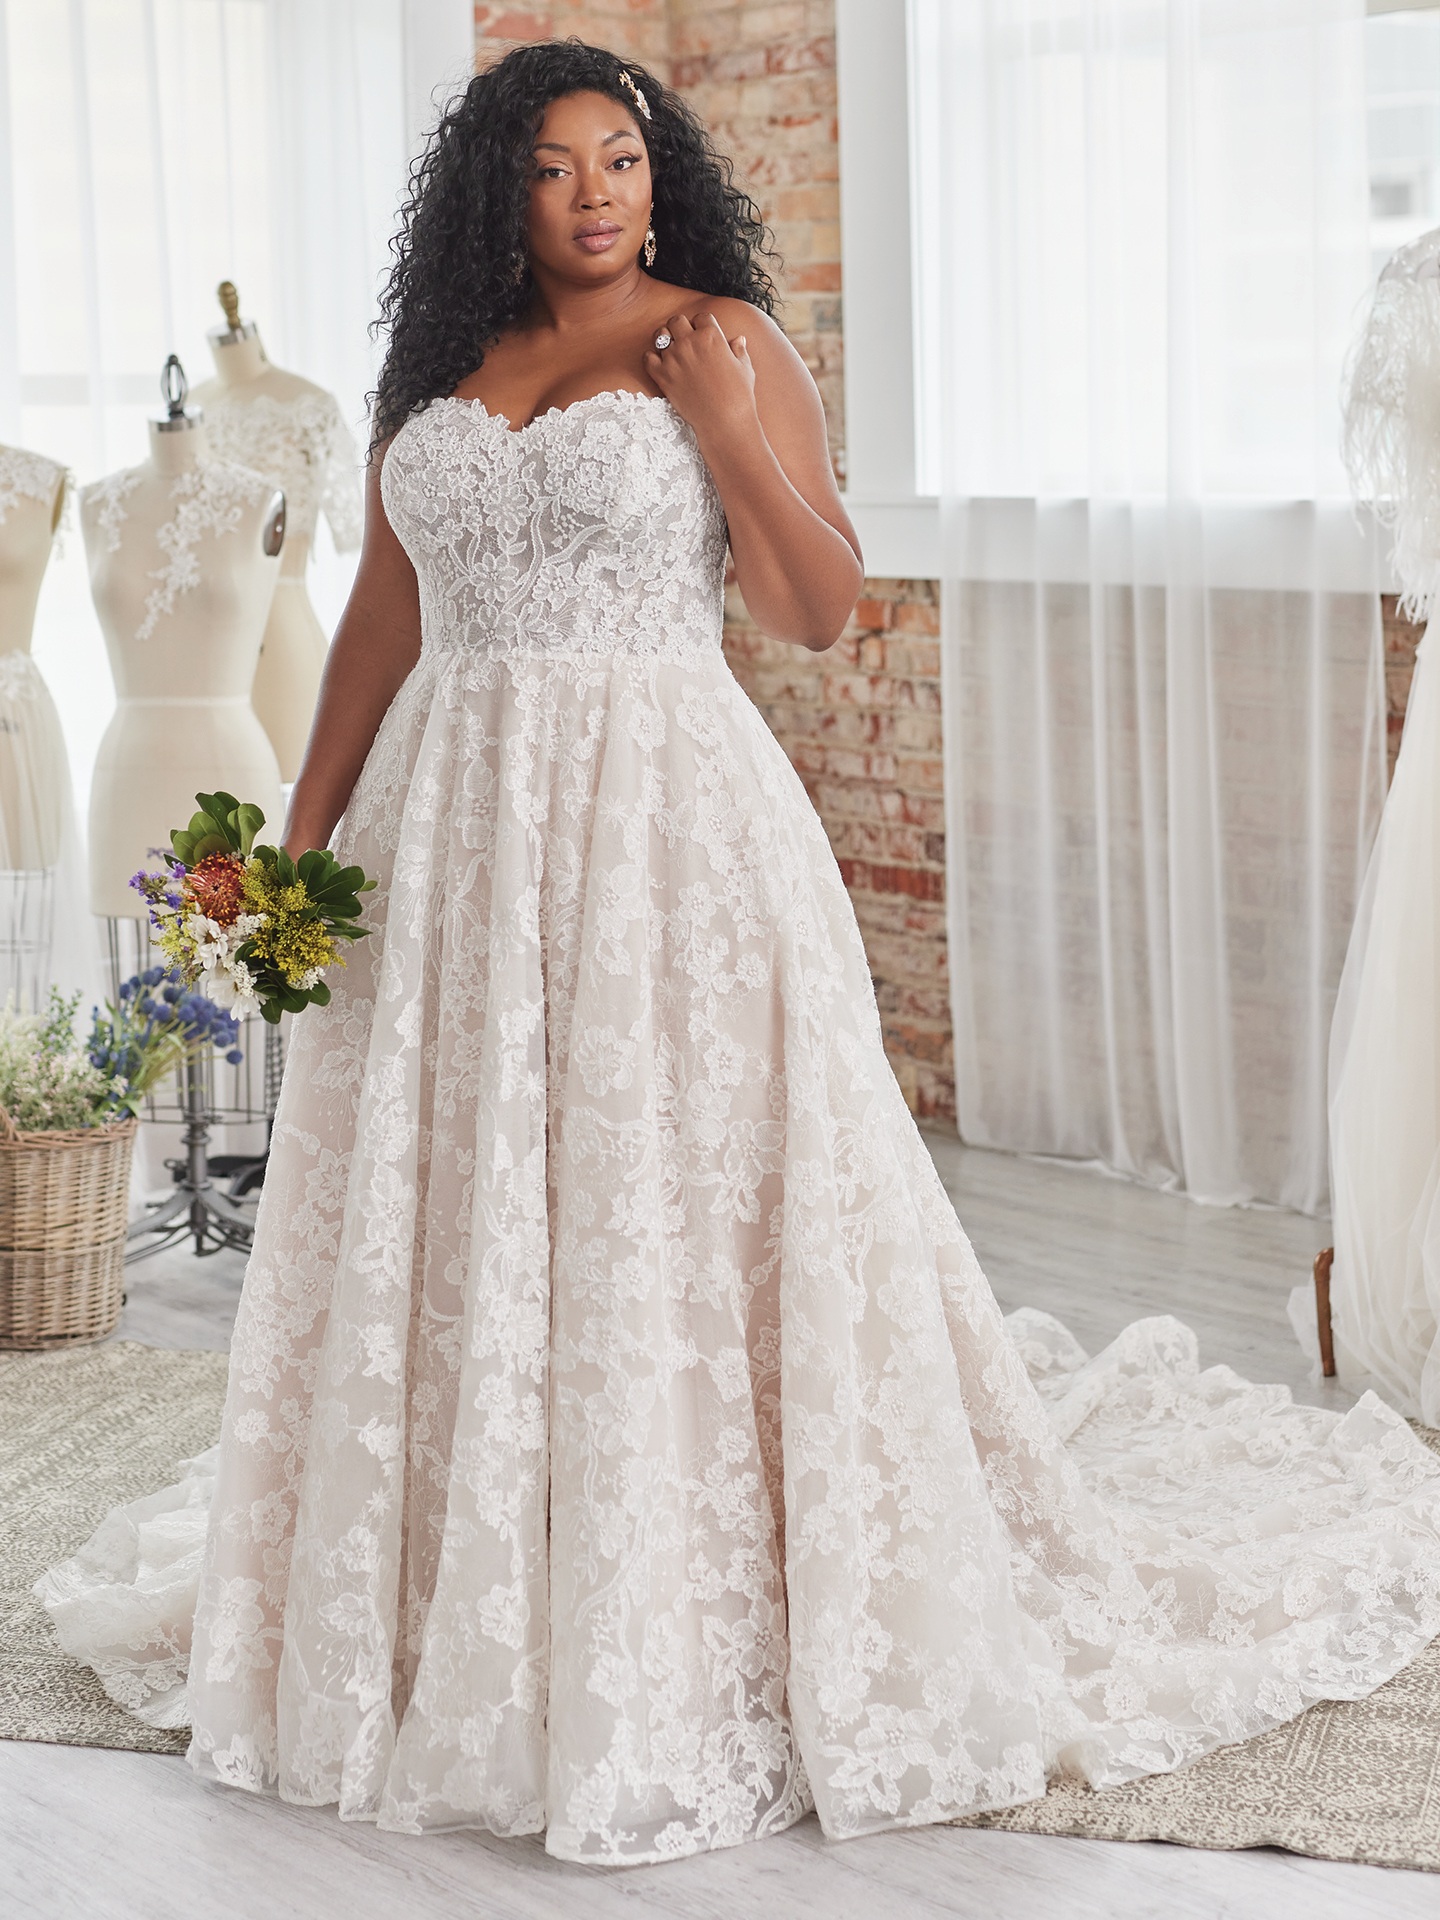 Fairytale Wedding Dresses & Bridal Gowns | hitched.co.uk